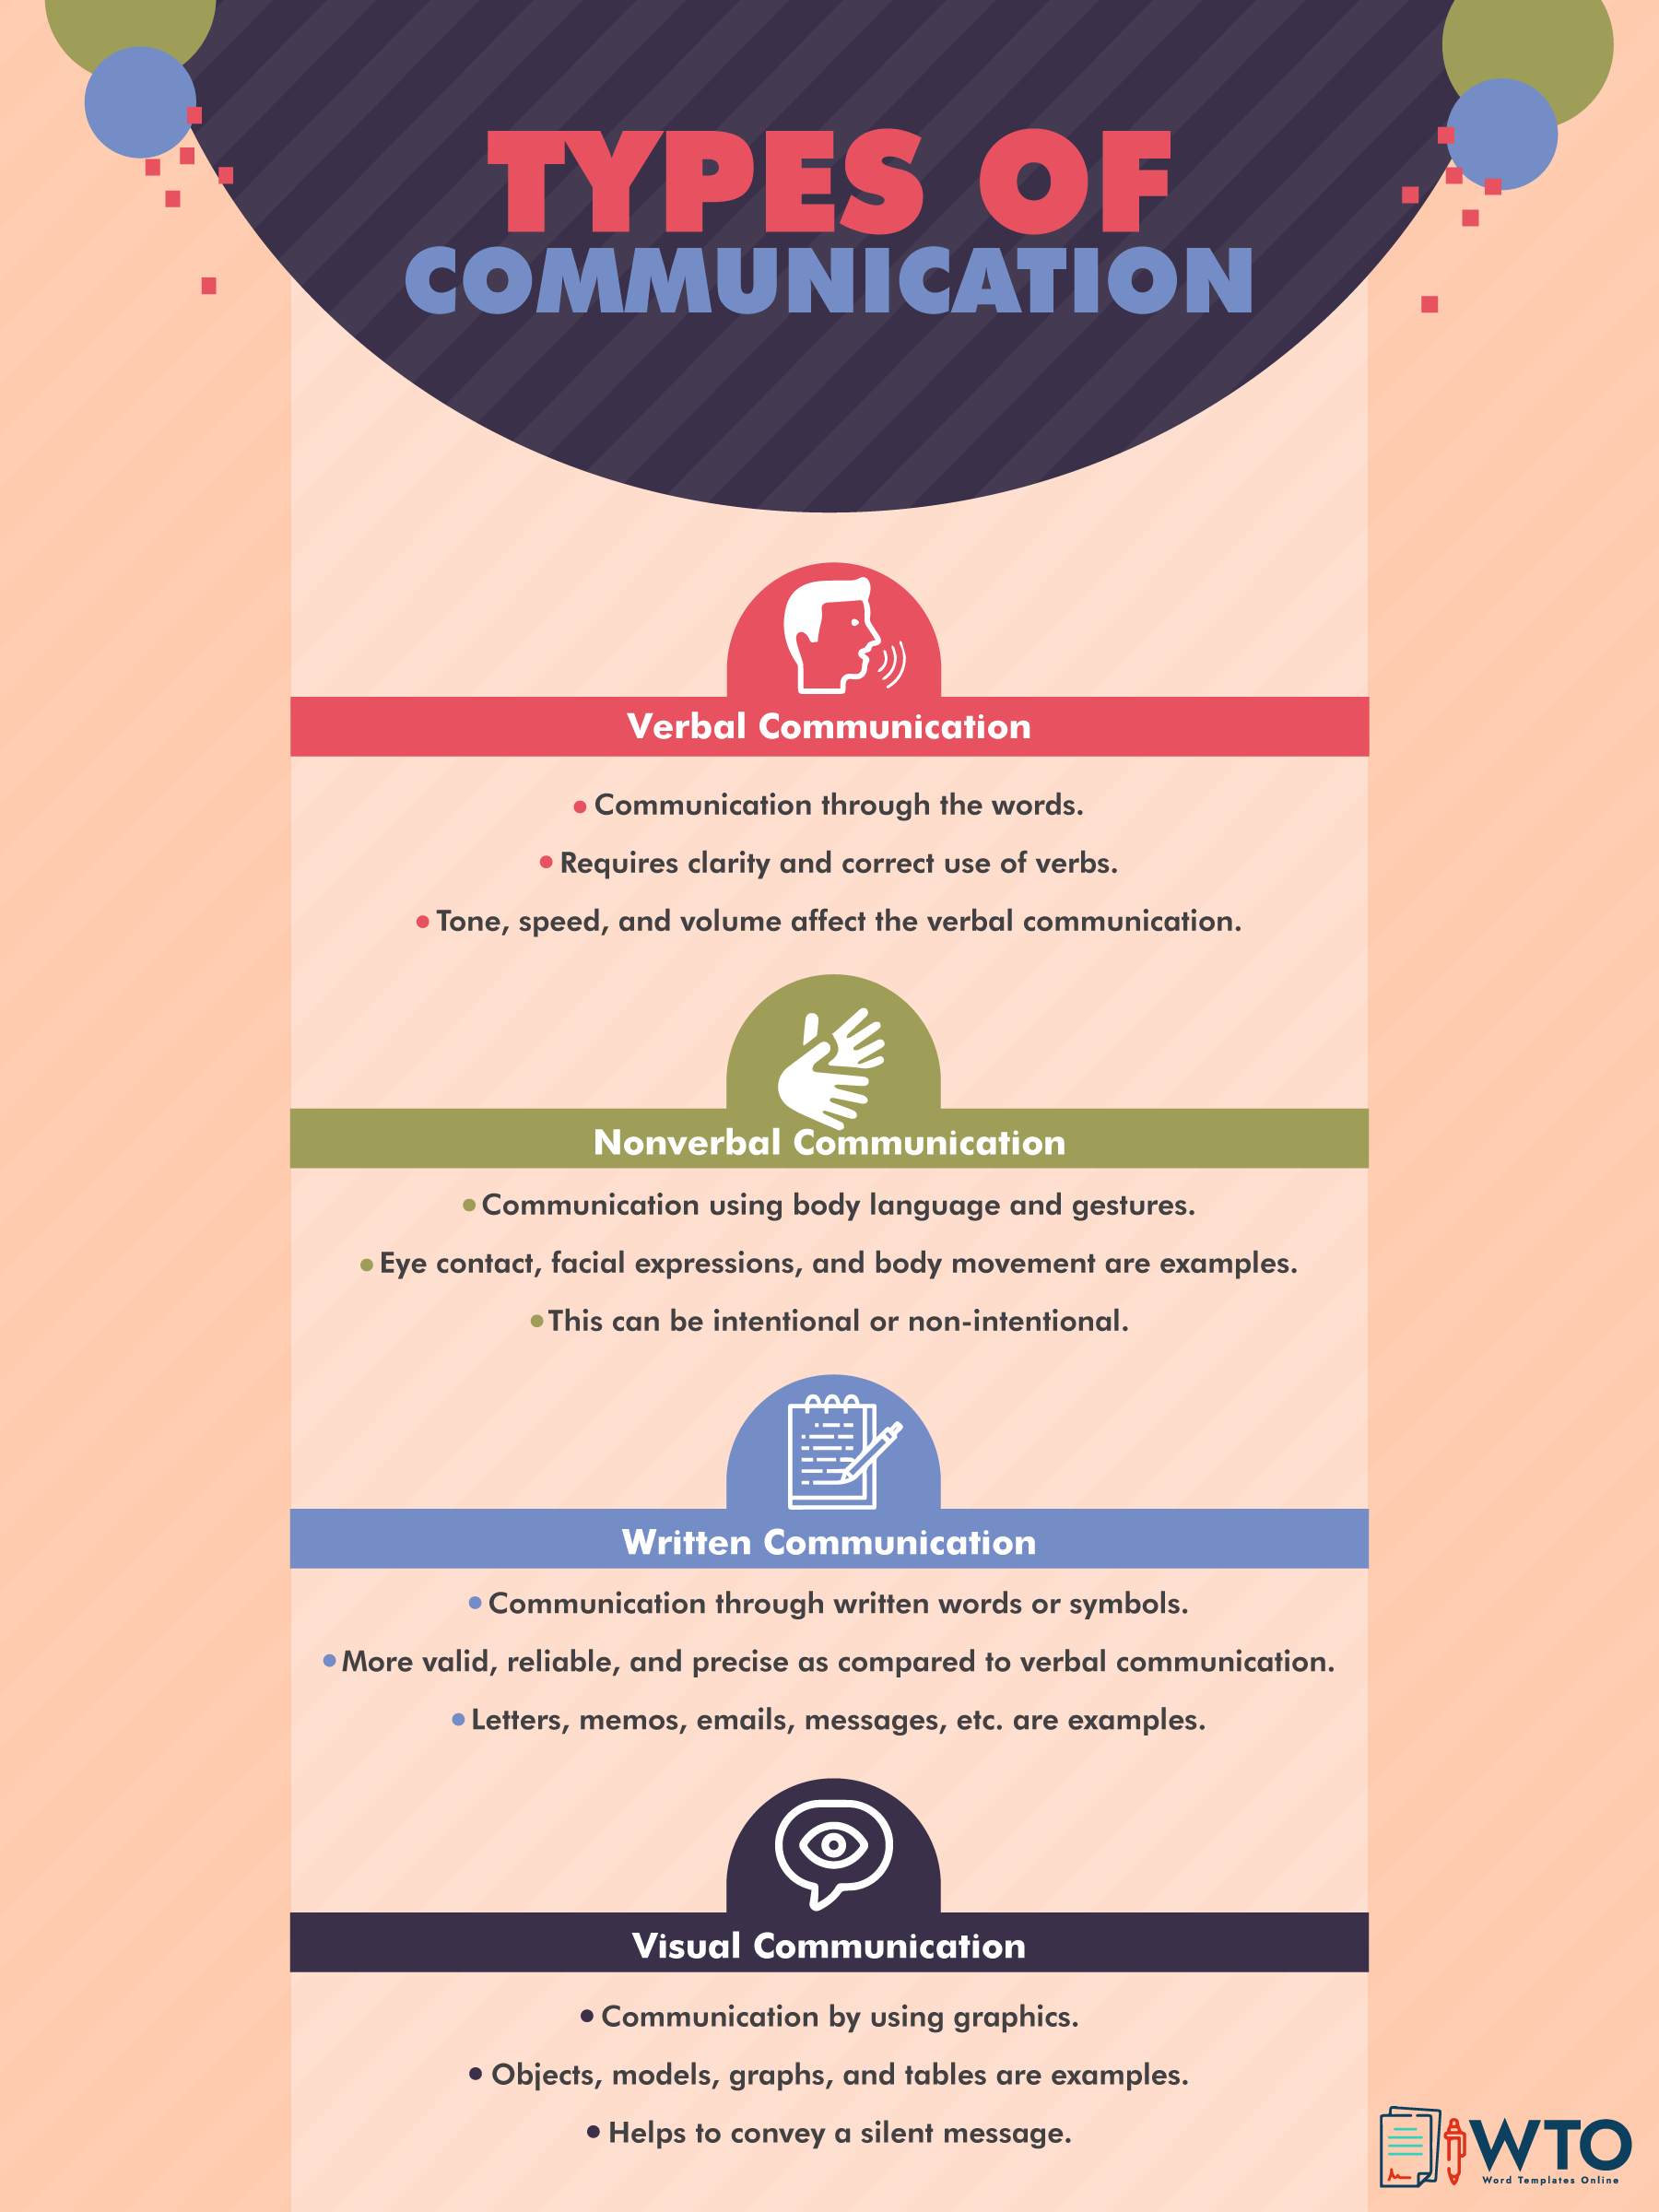 This infographic includes Types of Communication.